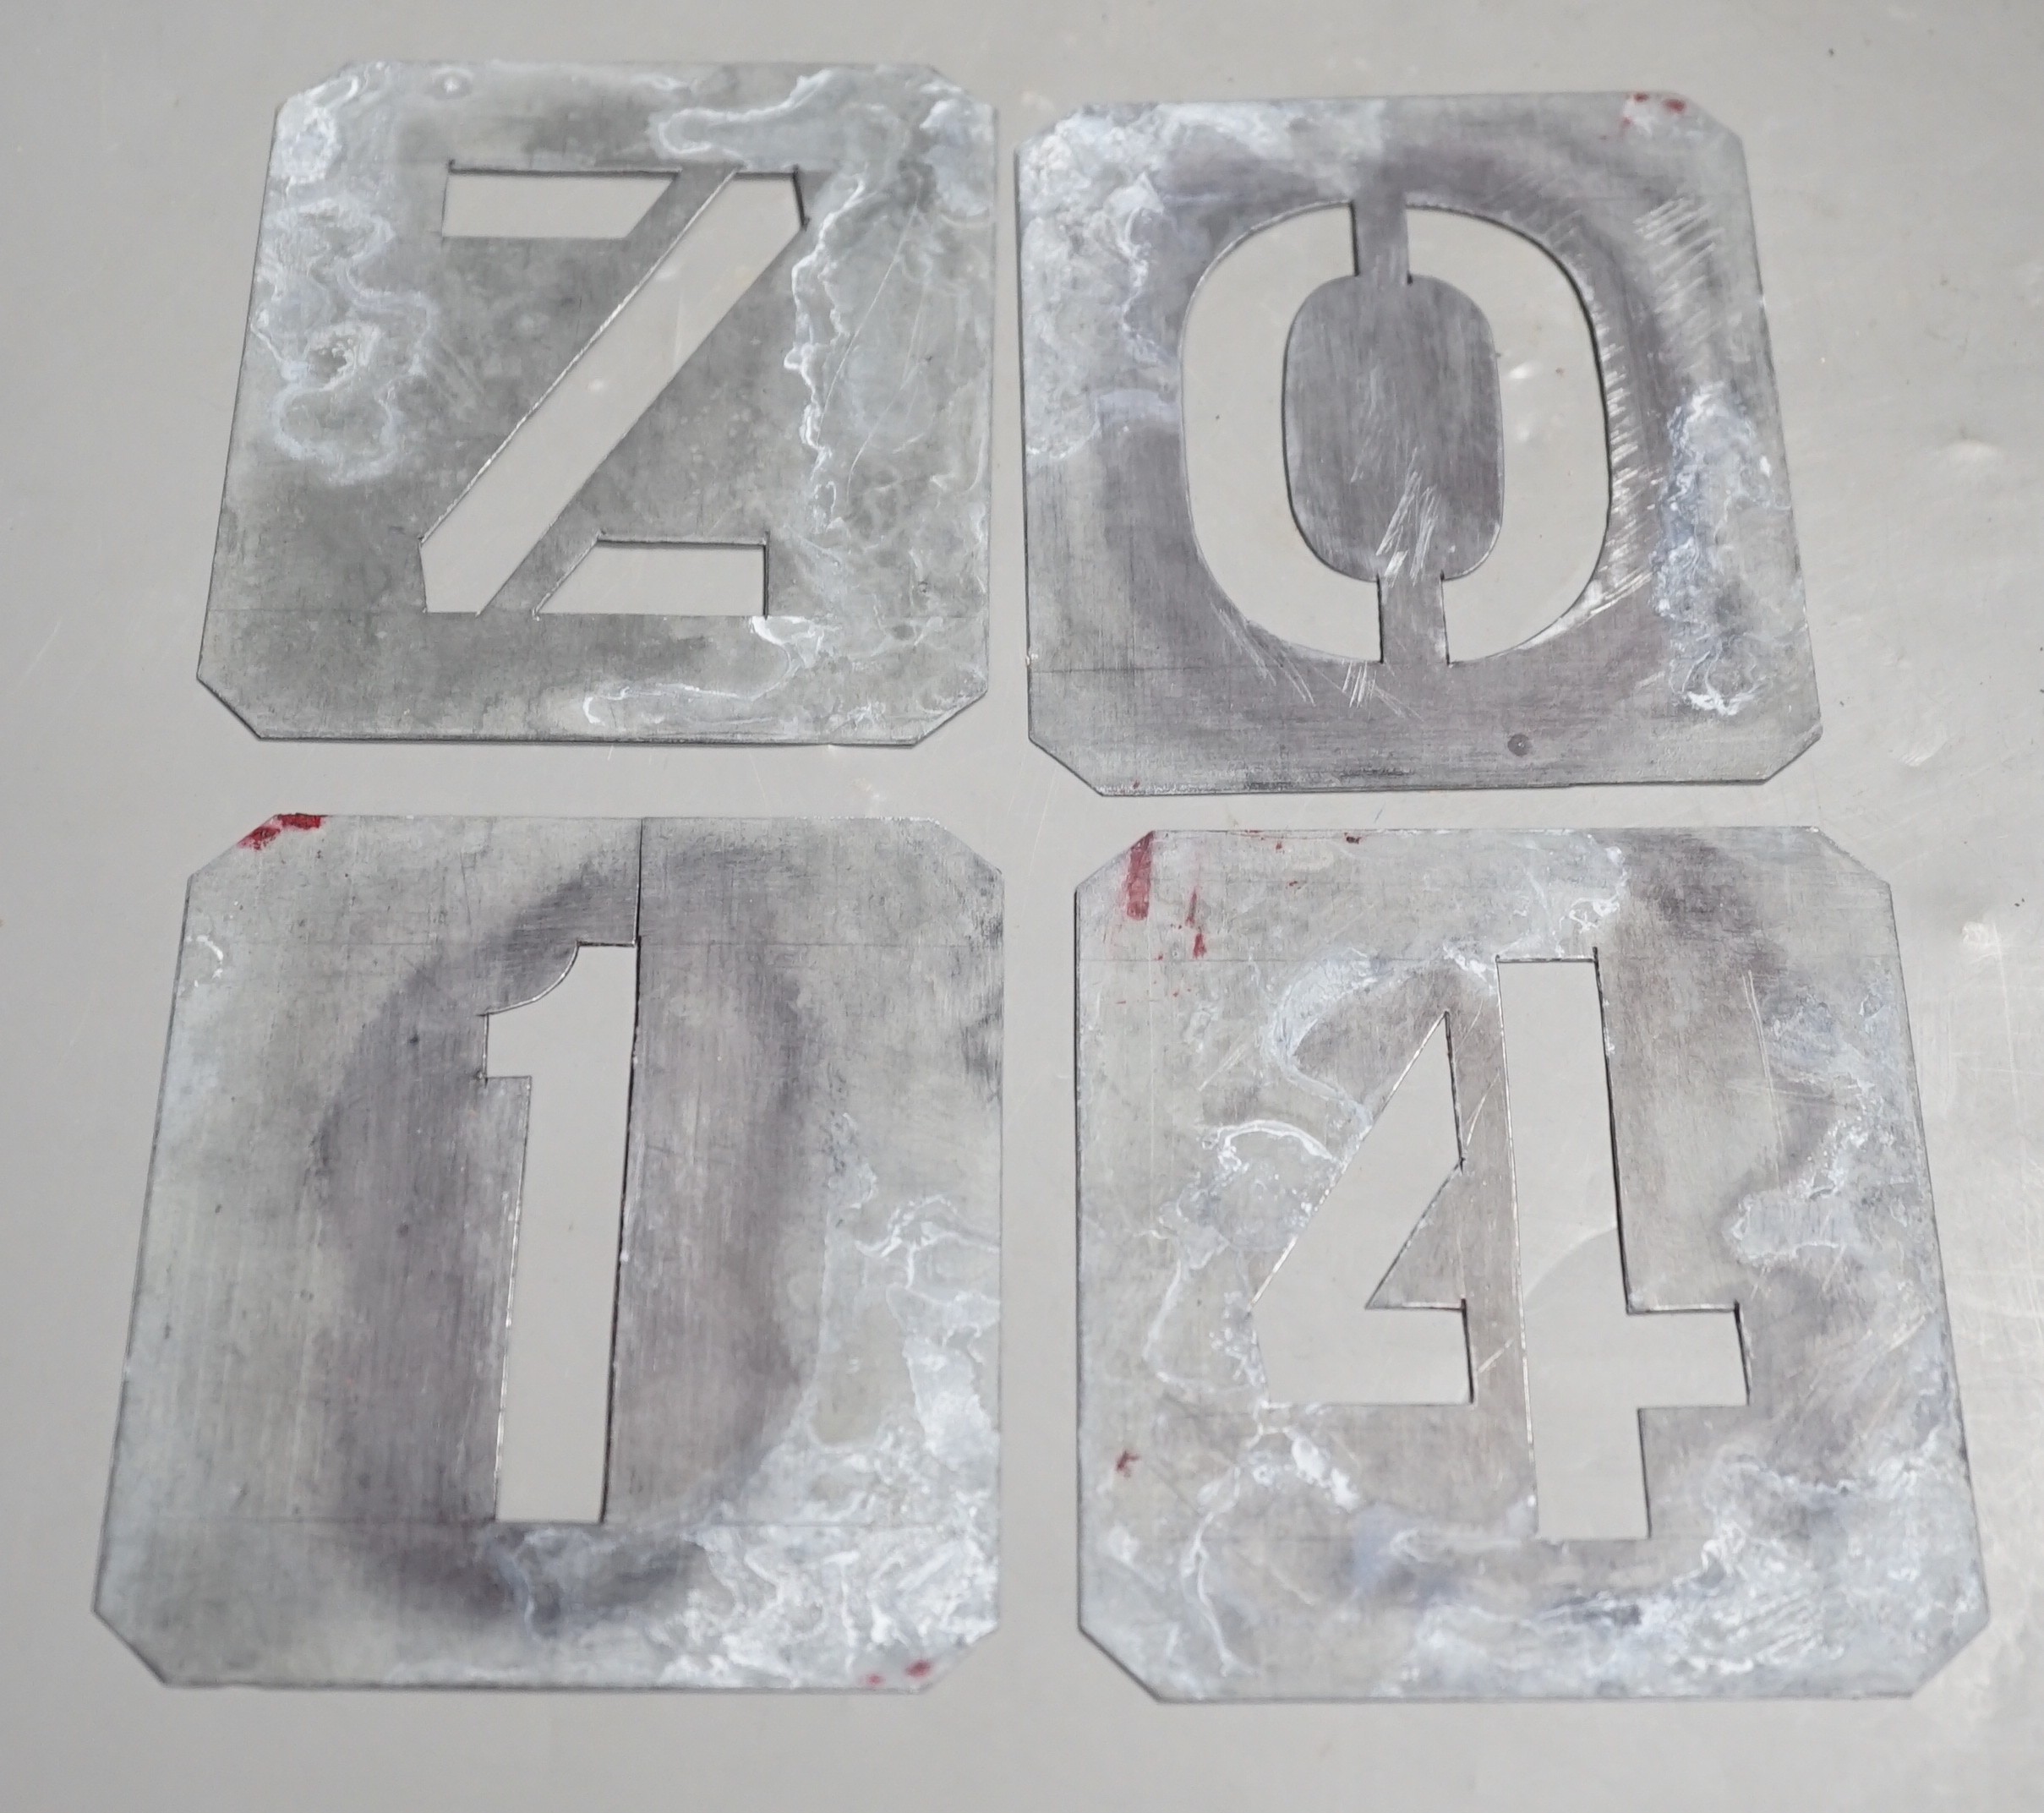 2 complete sets of zinc alphabetic stencils, one other set (C missing), and two part-sets of numerals